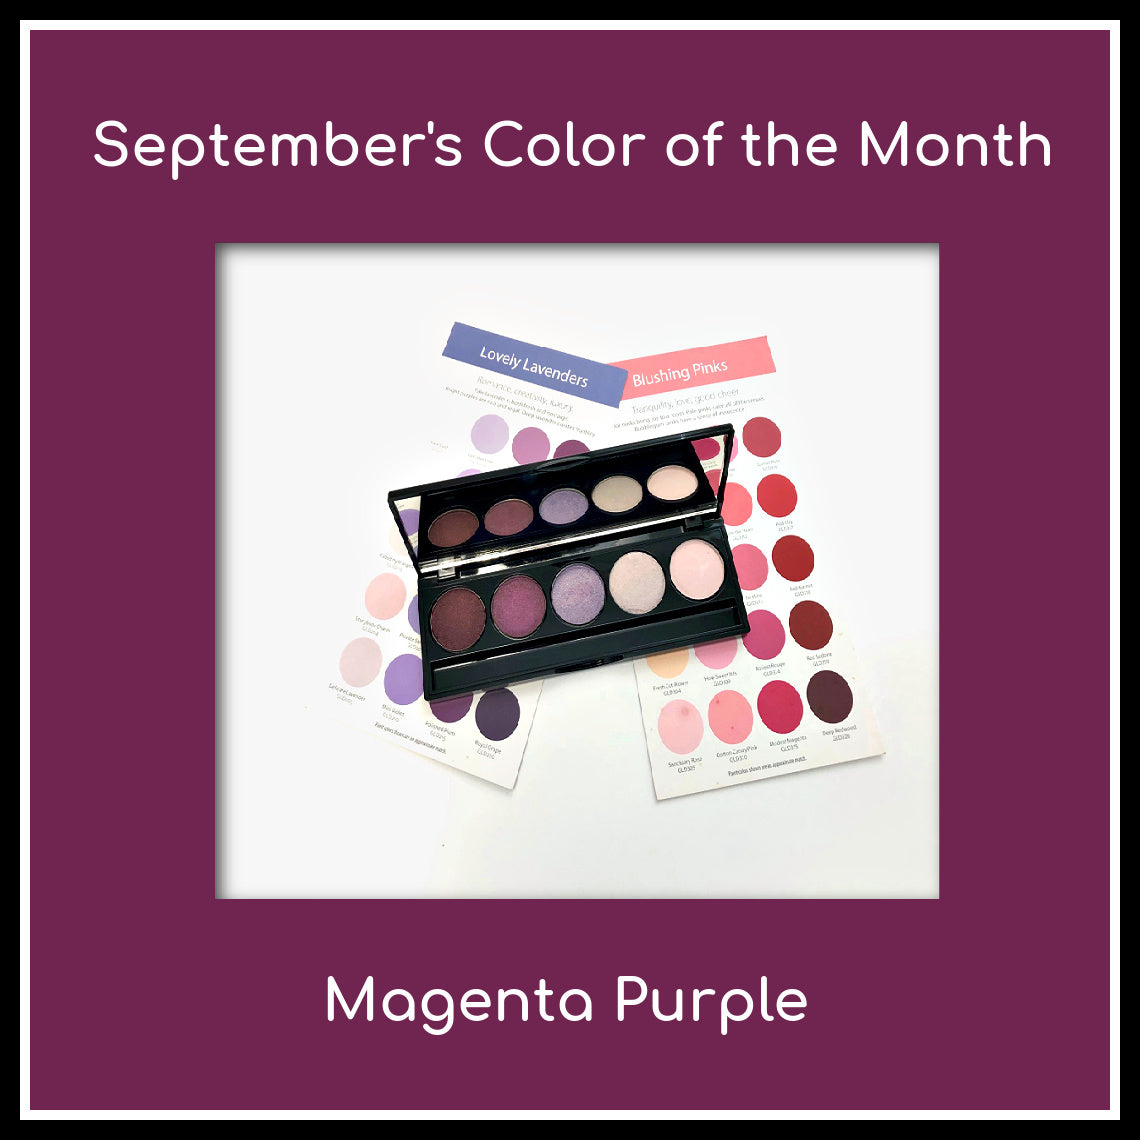 September's Color of the Month is Magenta Purple